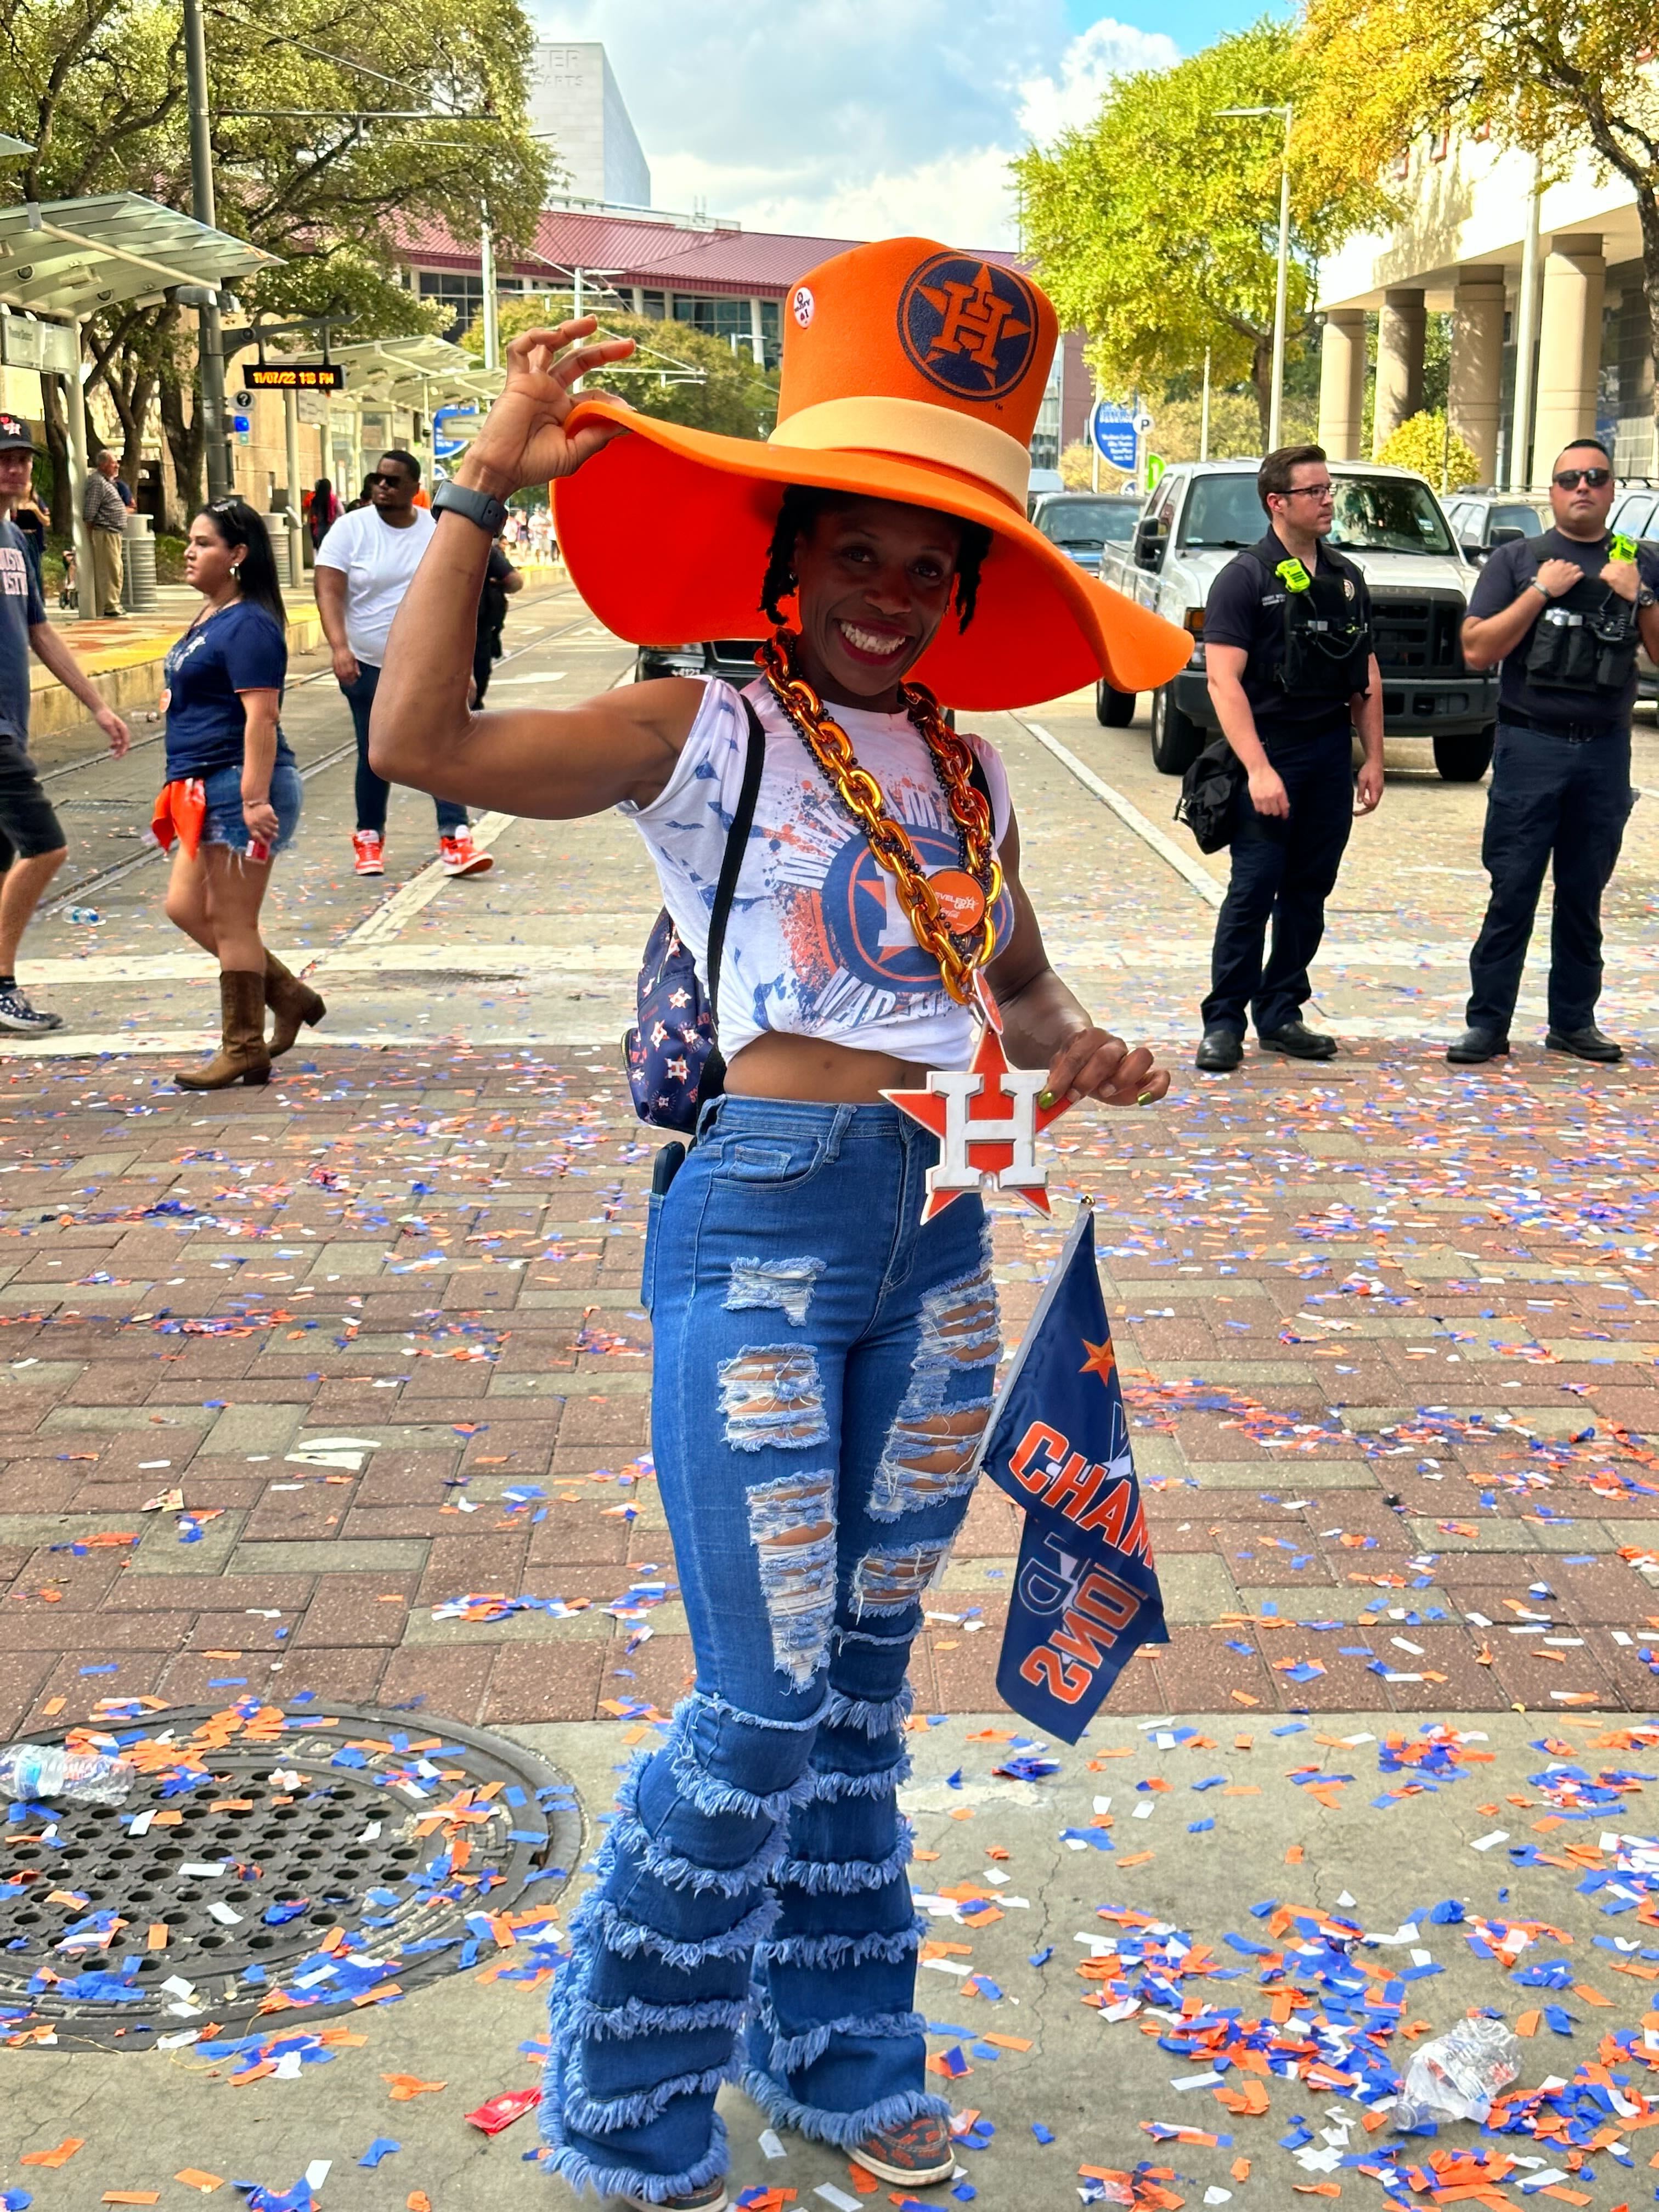 Houston Astros fans recreate viral 2017 hat stunt at parade